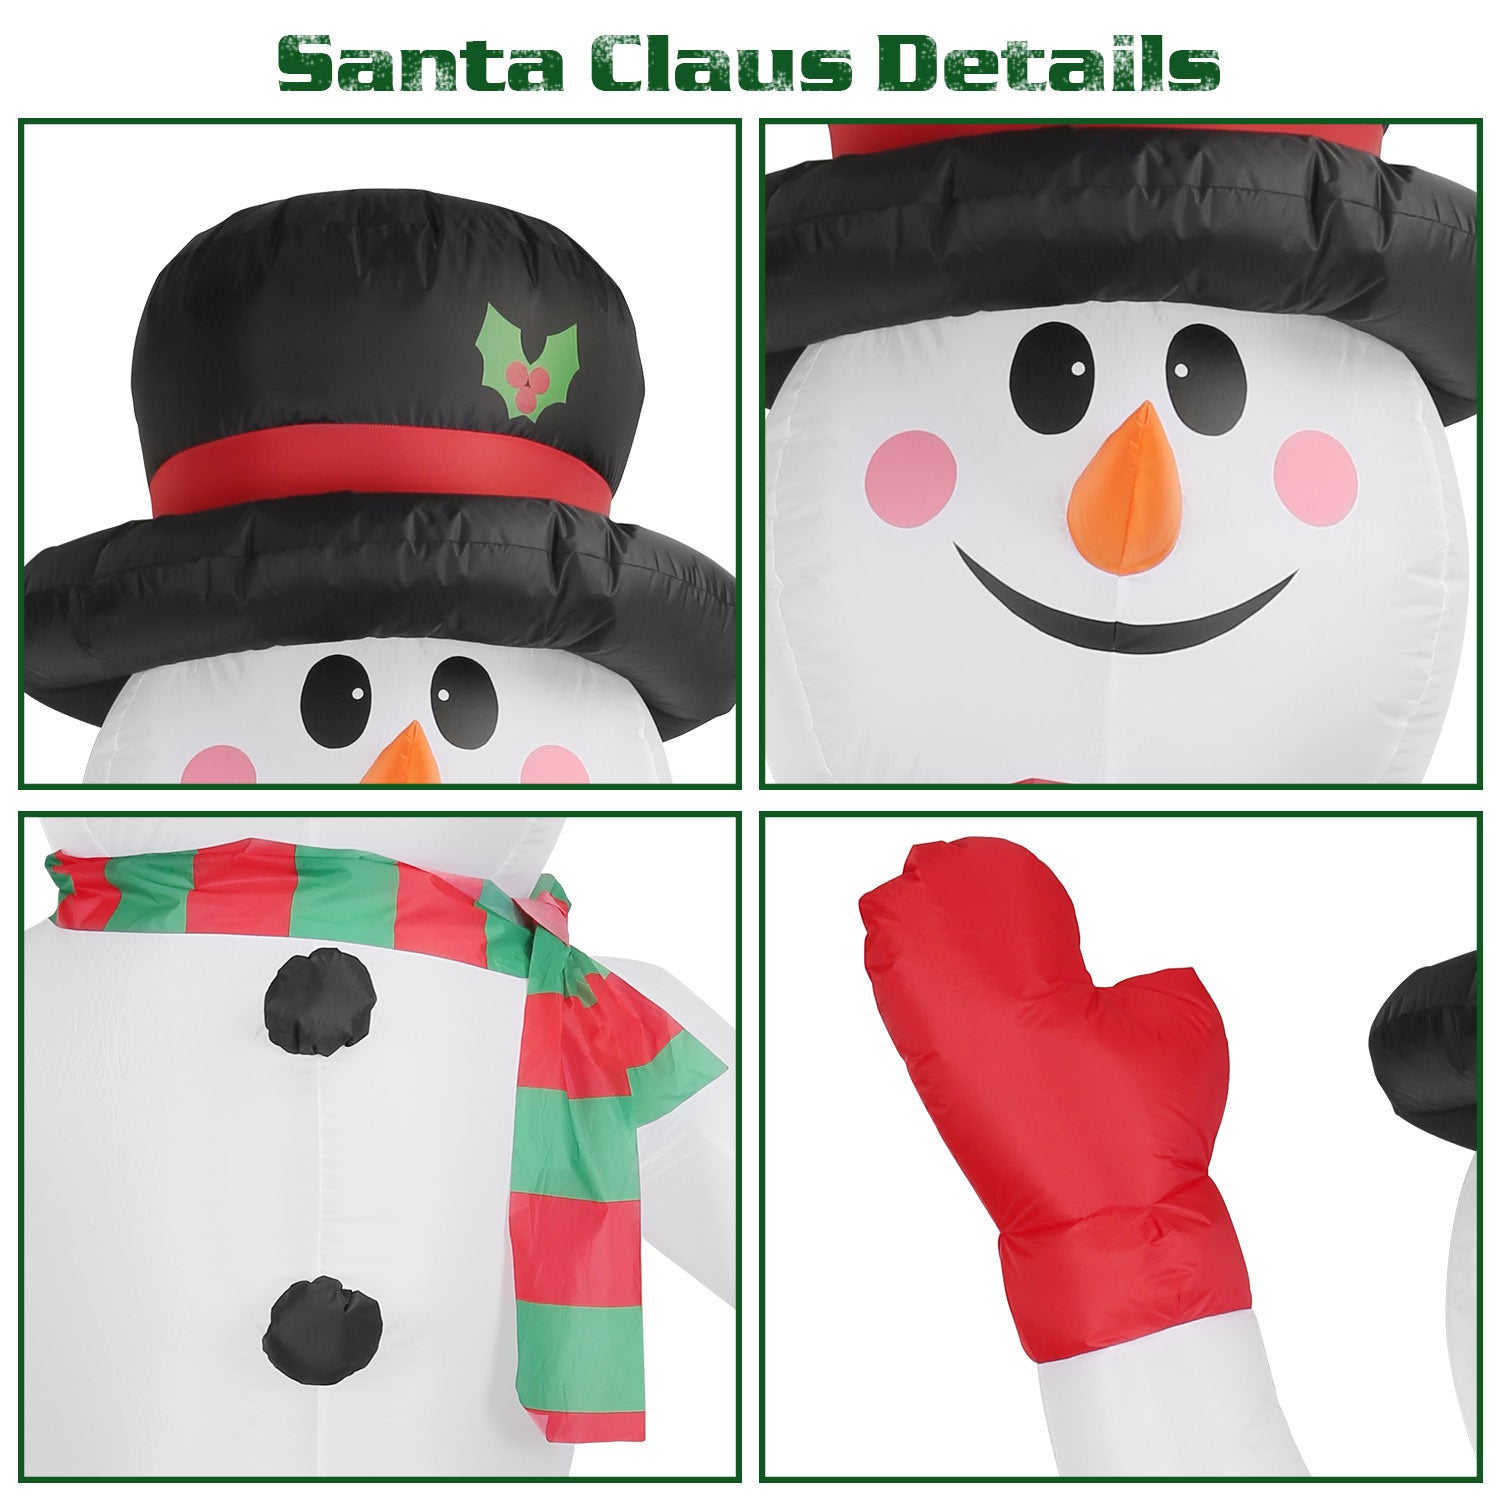 7.9FT Christmas Inflatable Giant Snowman Blow up Light up Snowman adorned with LED lights.